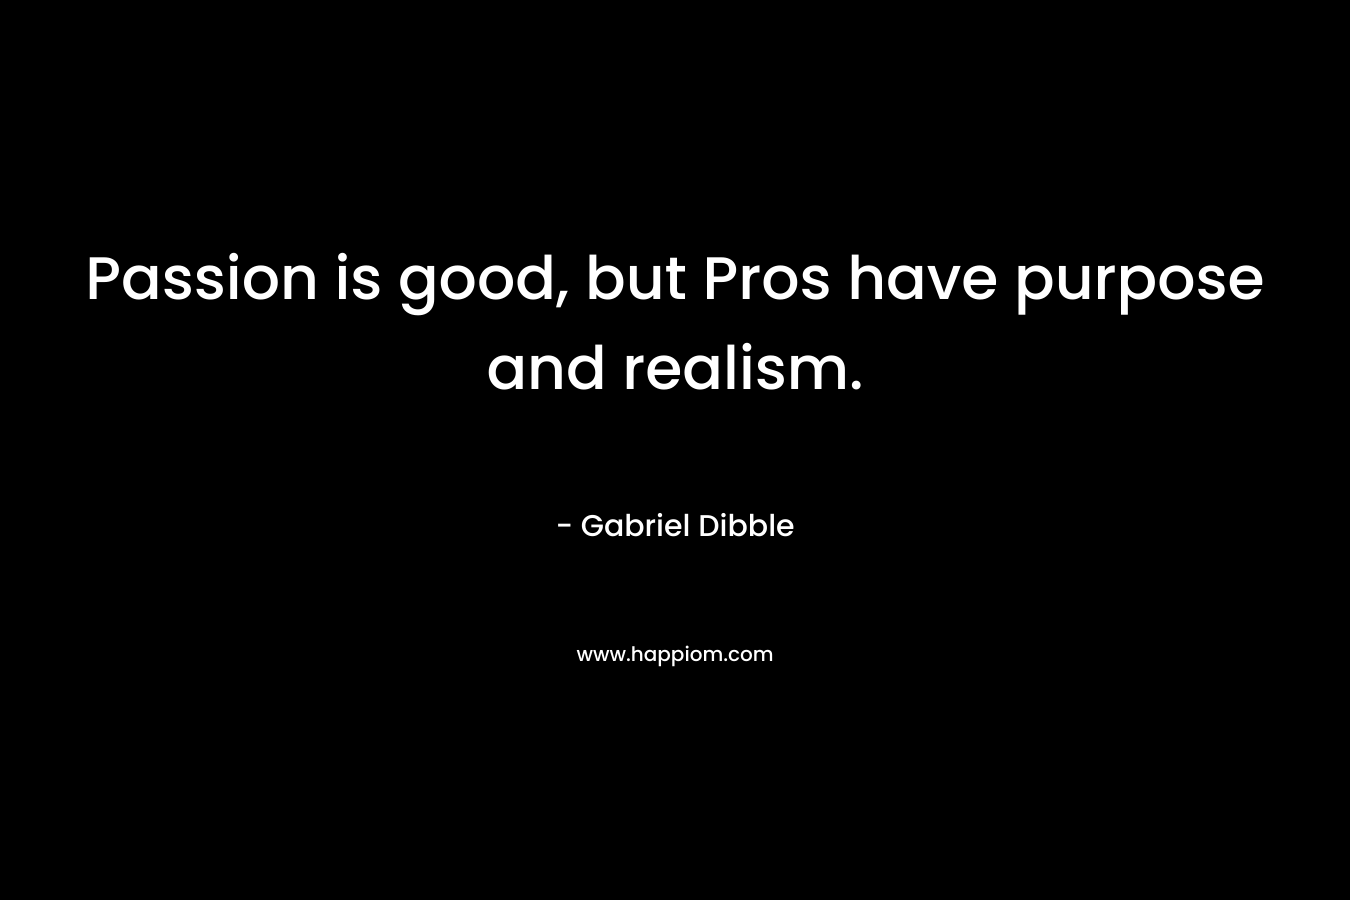 Passion is good, but Pros have purpose and realism. – Gabriel Dibble